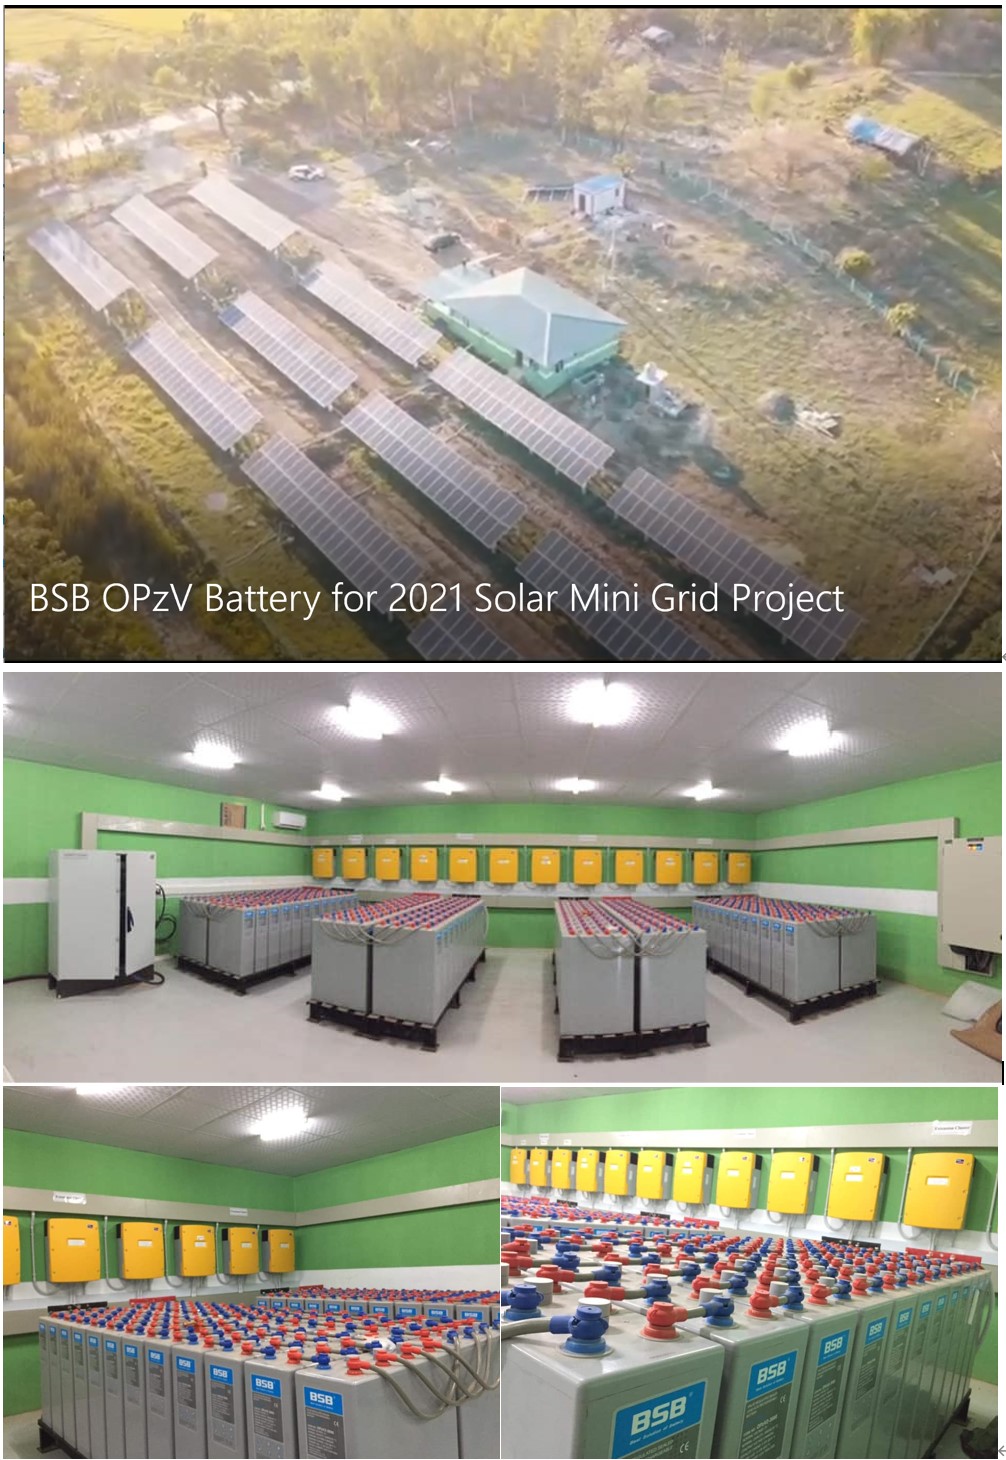 BSB OPzV Battery for 2021 Myanmar Solar Mini Grid Project